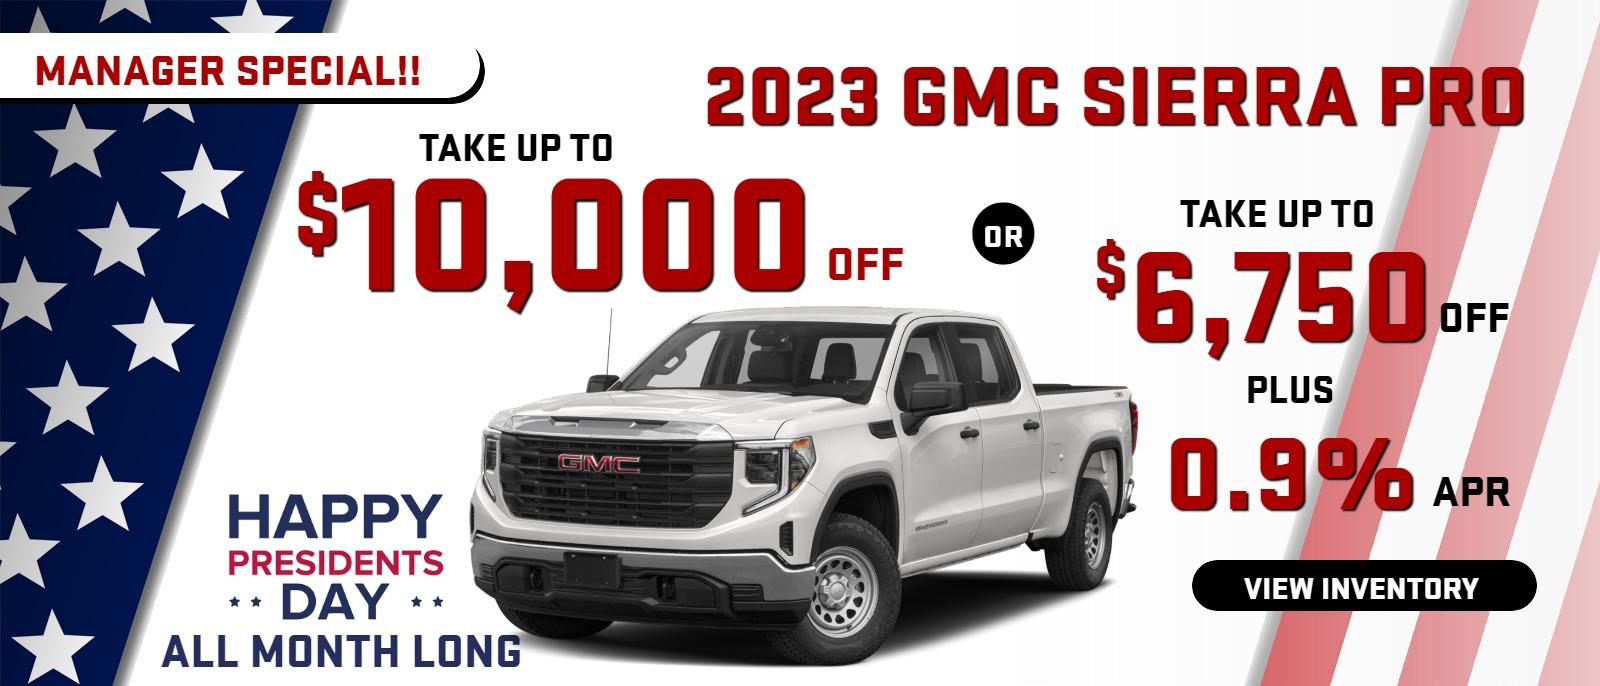 2023 Sierra PRO MANAGER SPECIAL
Stock G8974

take up to $6750 OFF
PLUS
0.9% finance 

OR 
take up to $10,000.00 OFF